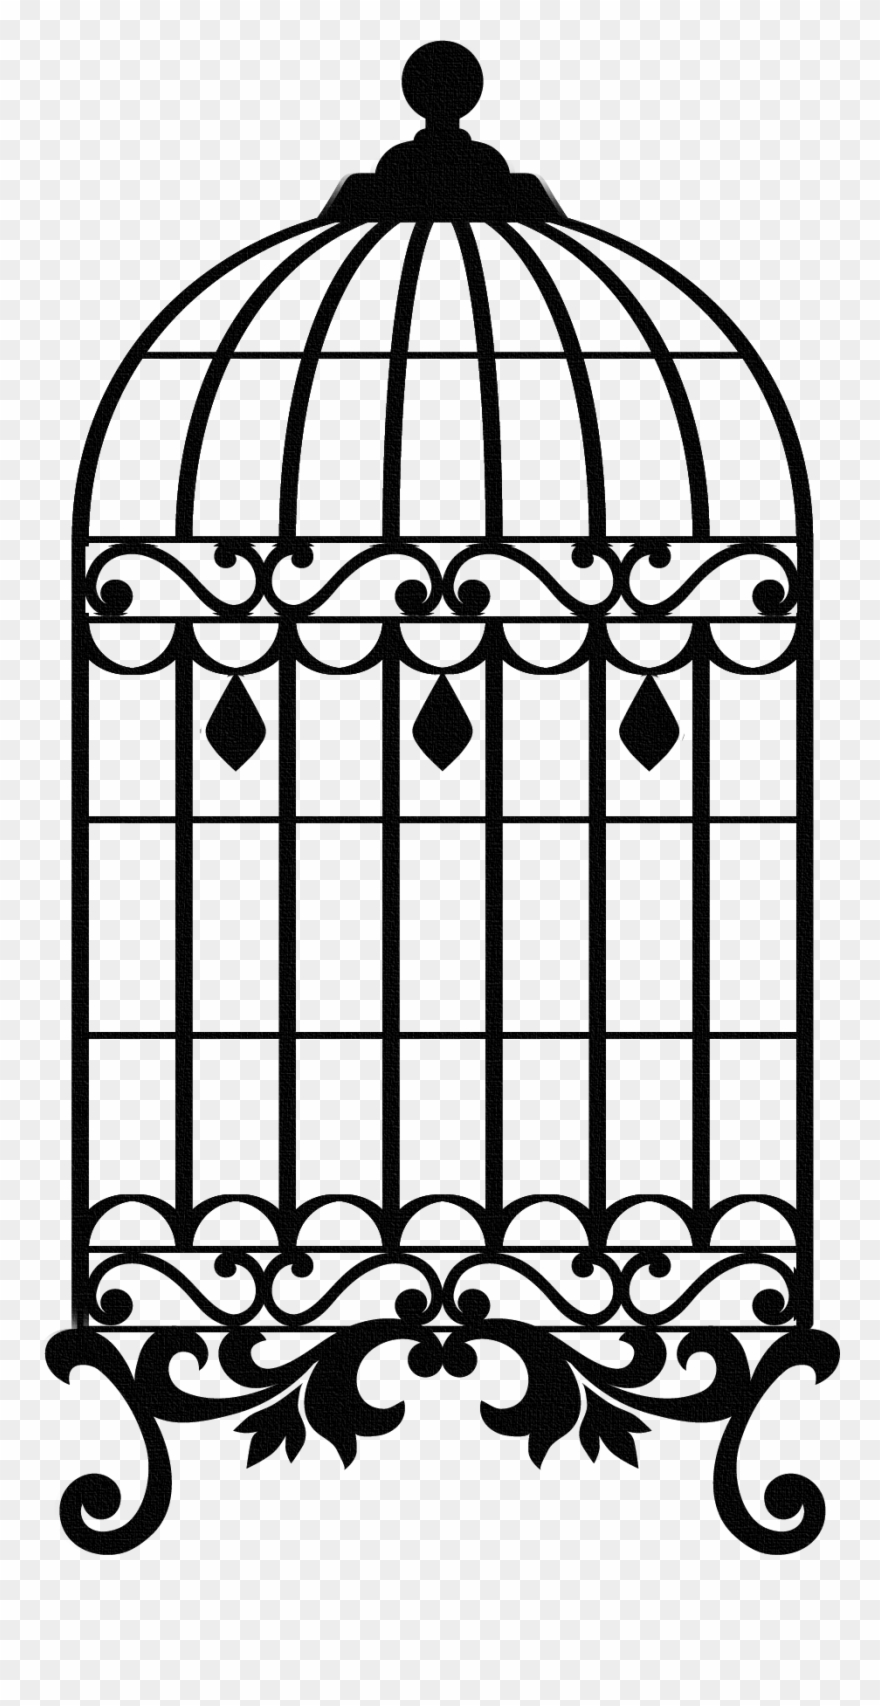 cage clipart medieval